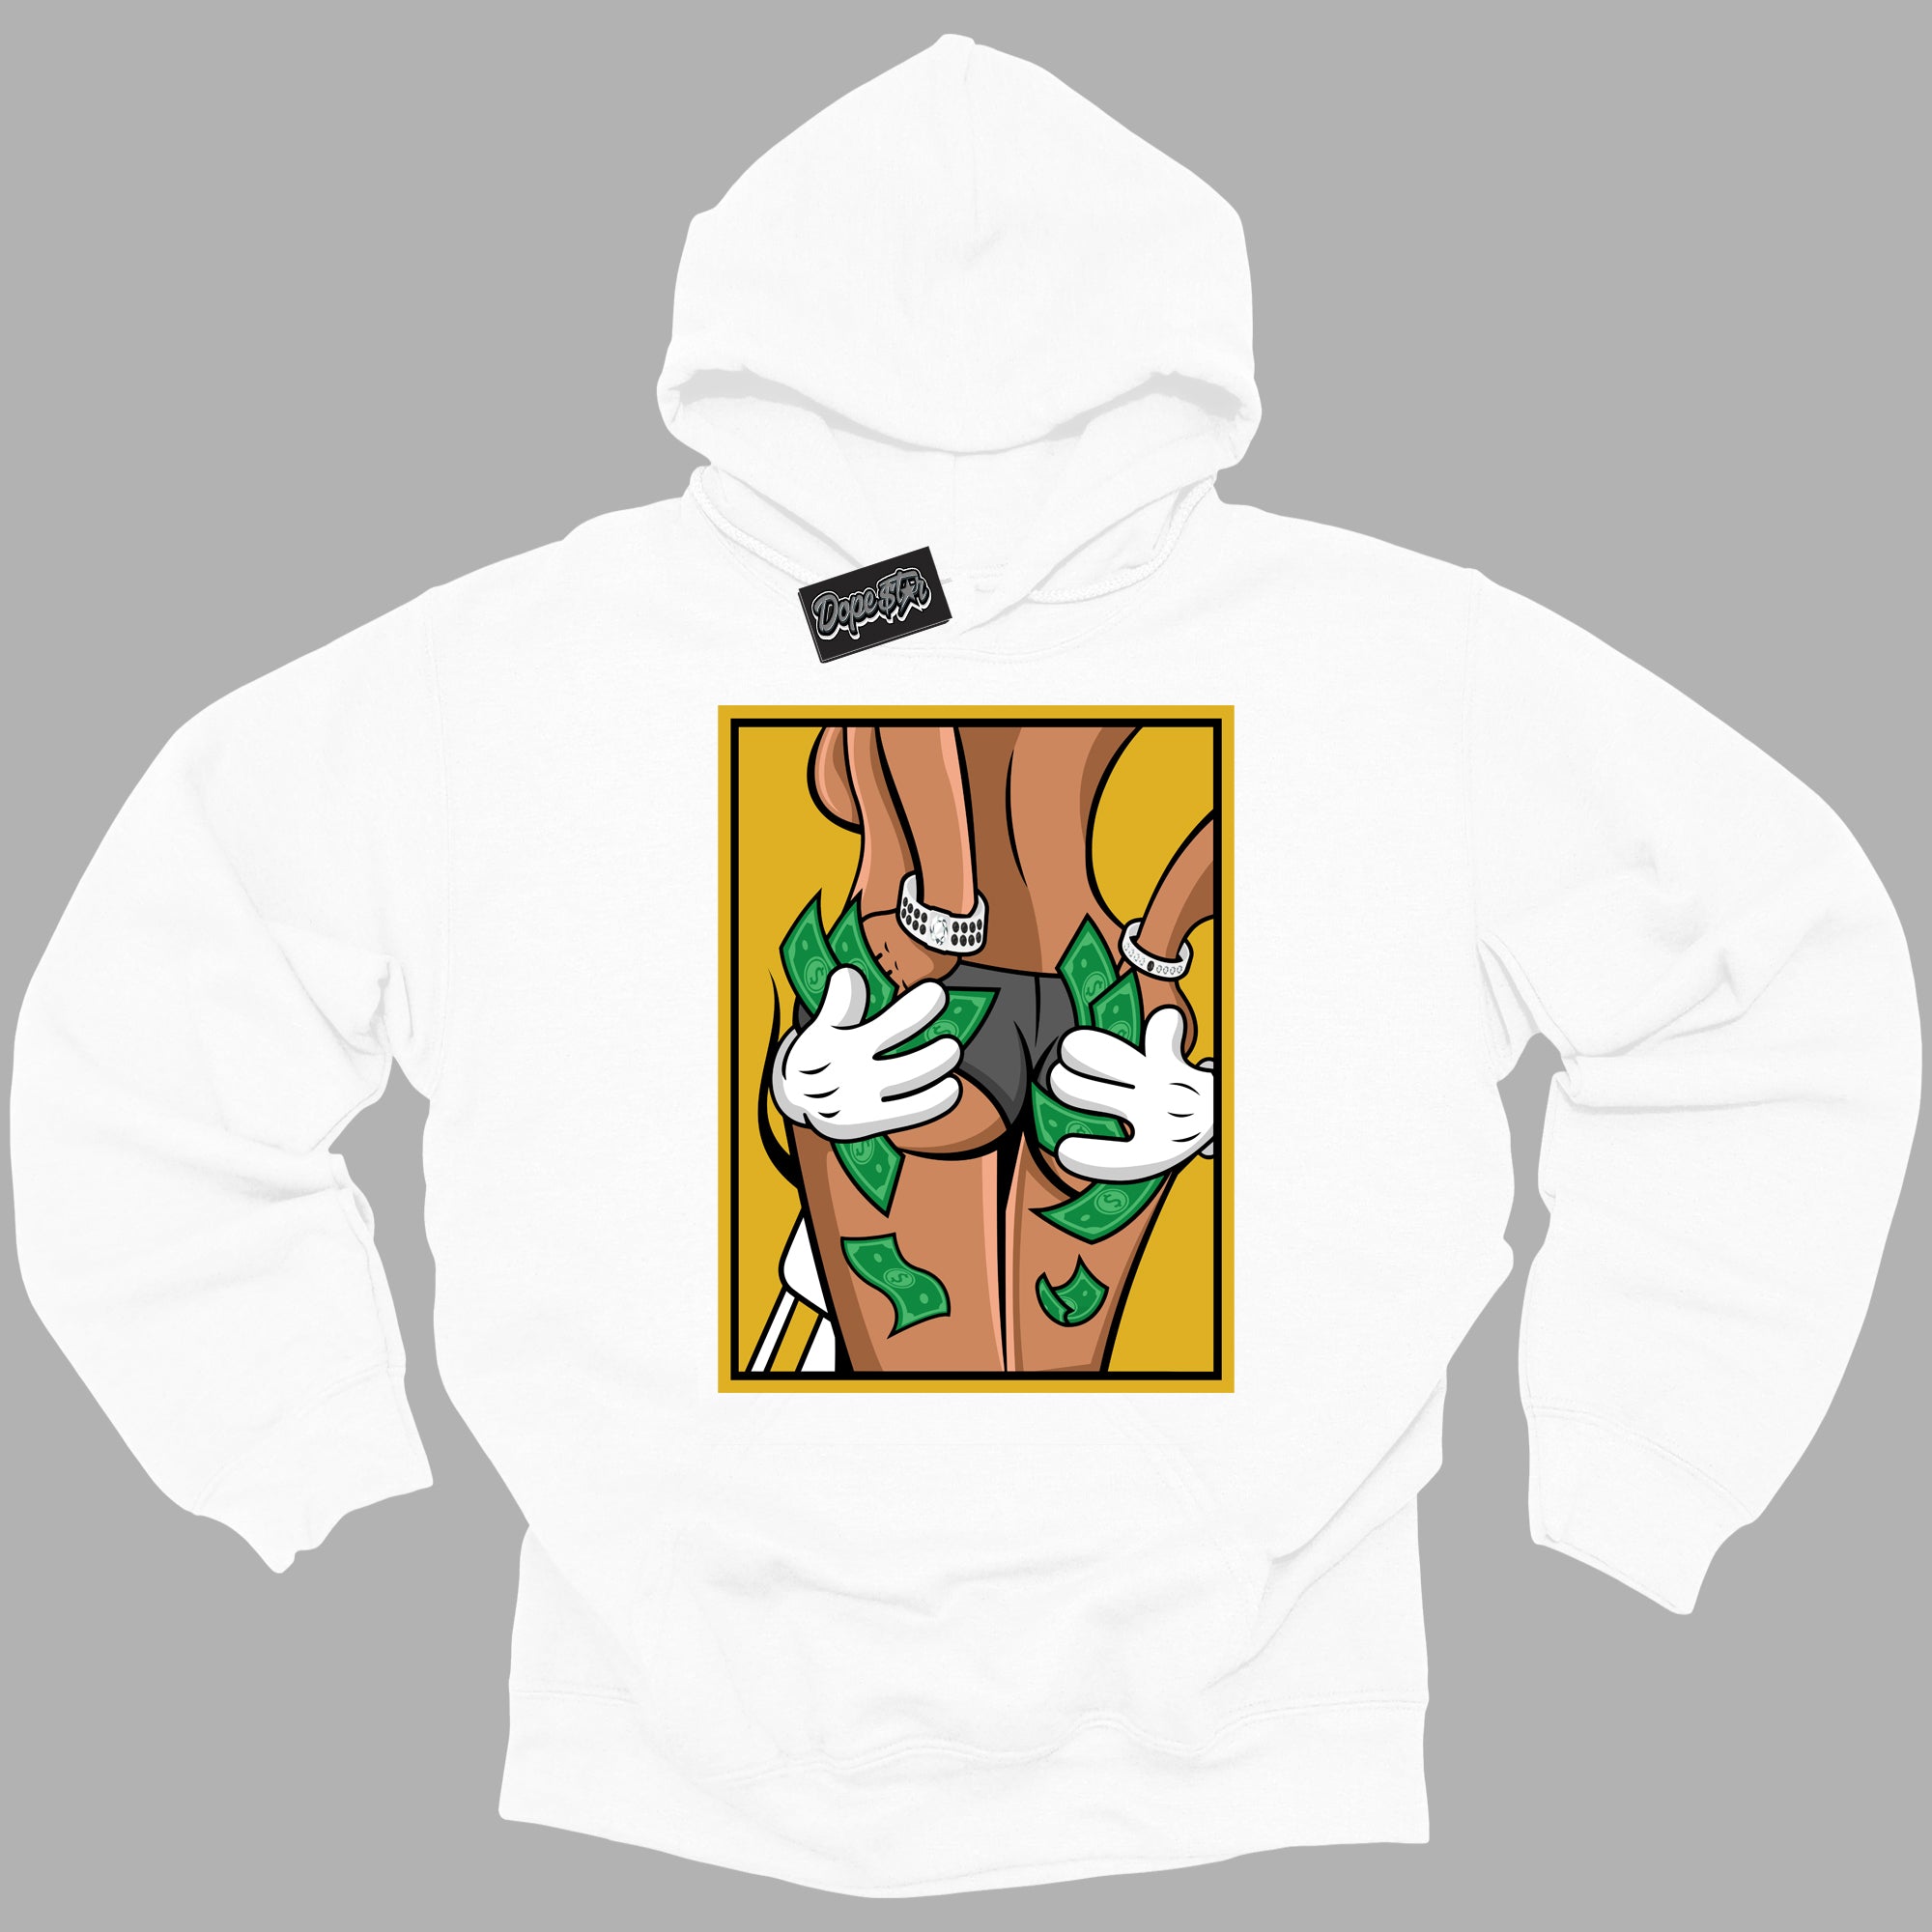 Cool White Hoodie with “ Money Hands ”  design that Perfectly Matches Yellow Ochre 6s Sneakers.